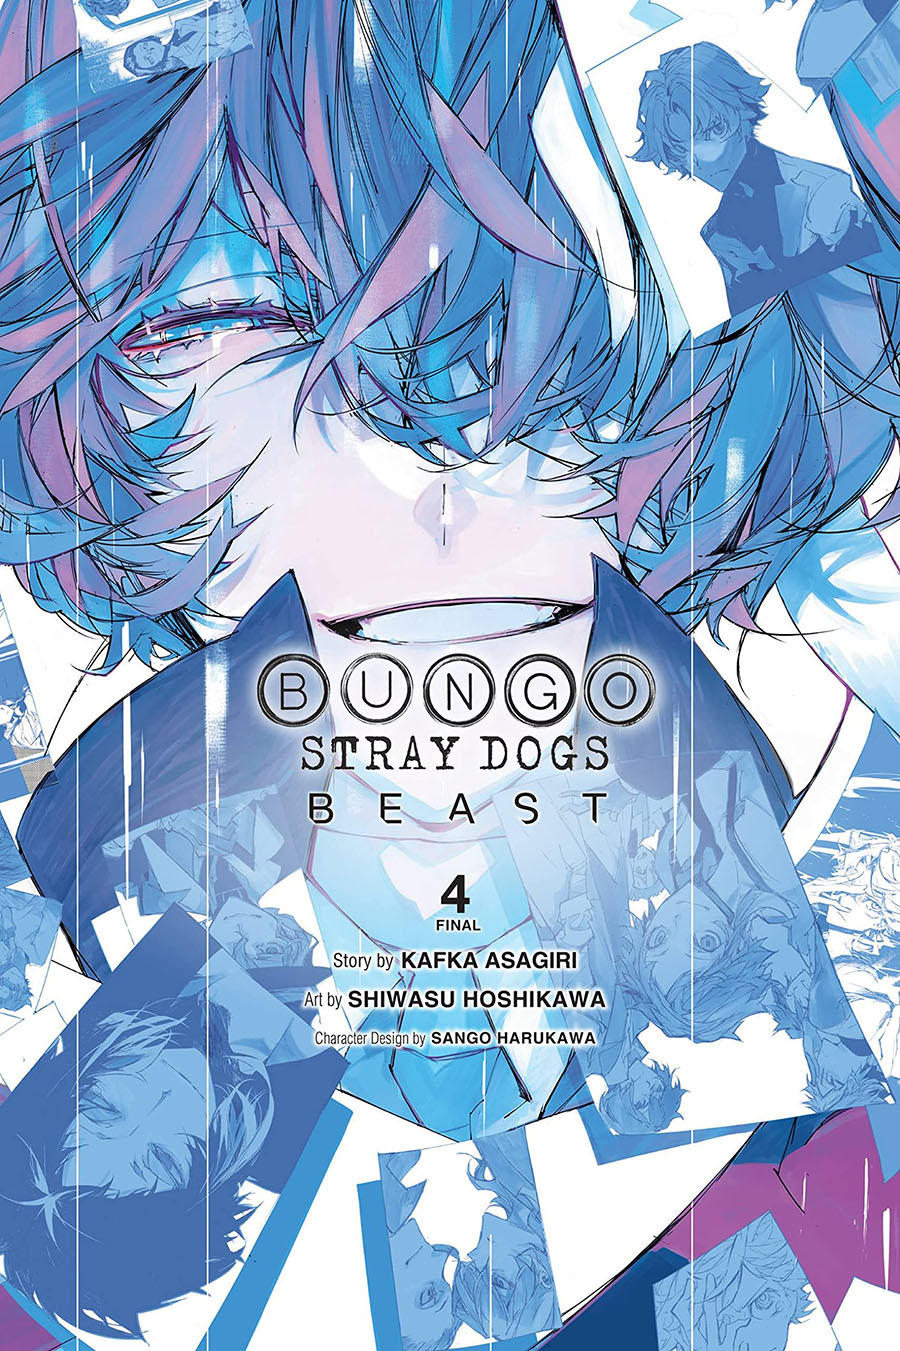 Bungo Stray Dogs Beast Vol 4 GN